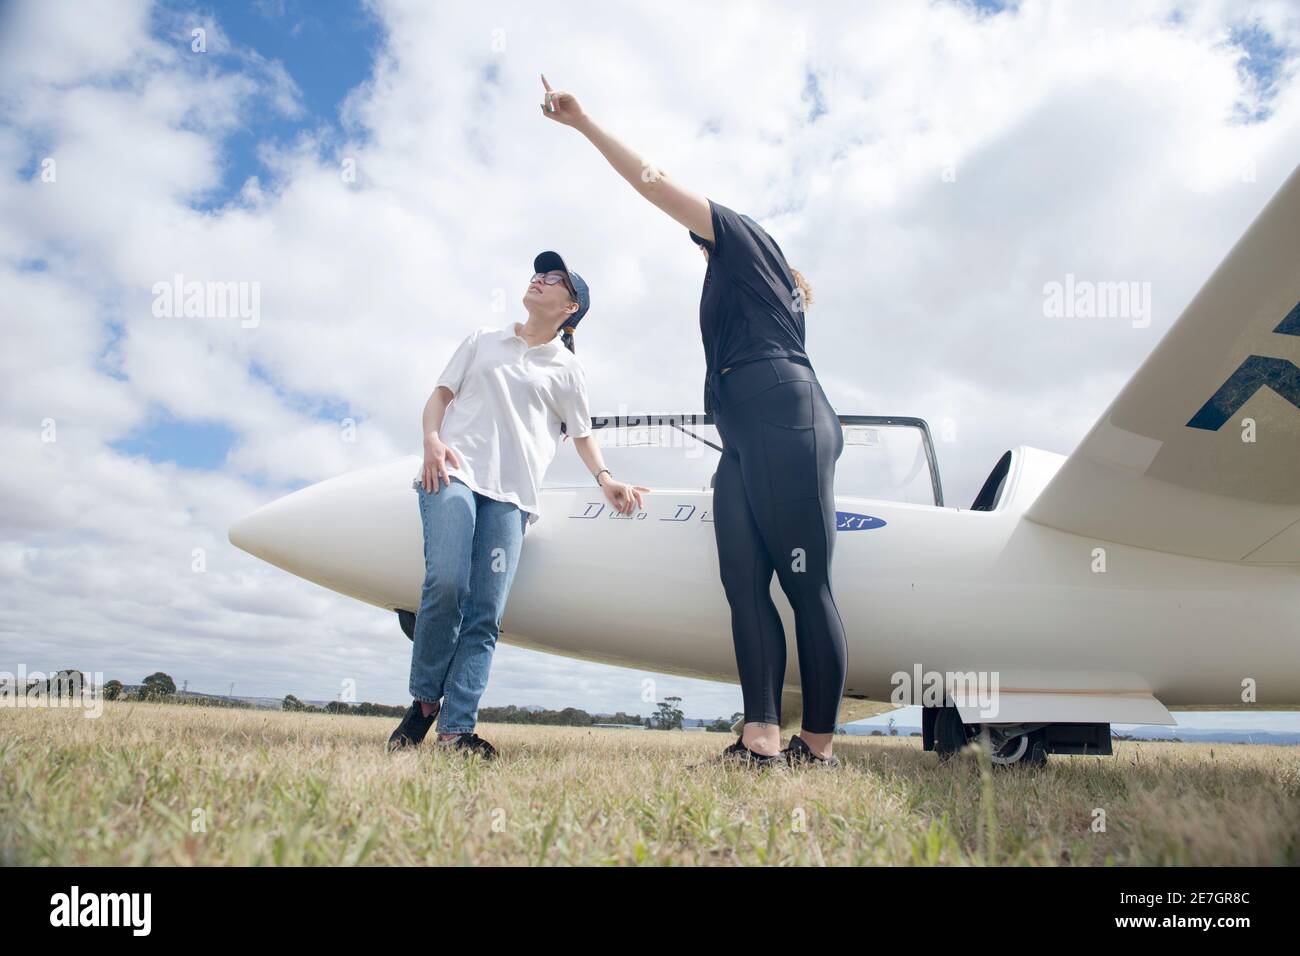 Two young women at the Melbourne Gliding Club at the Bacchus Marsh Gliding Centre Stock Photo